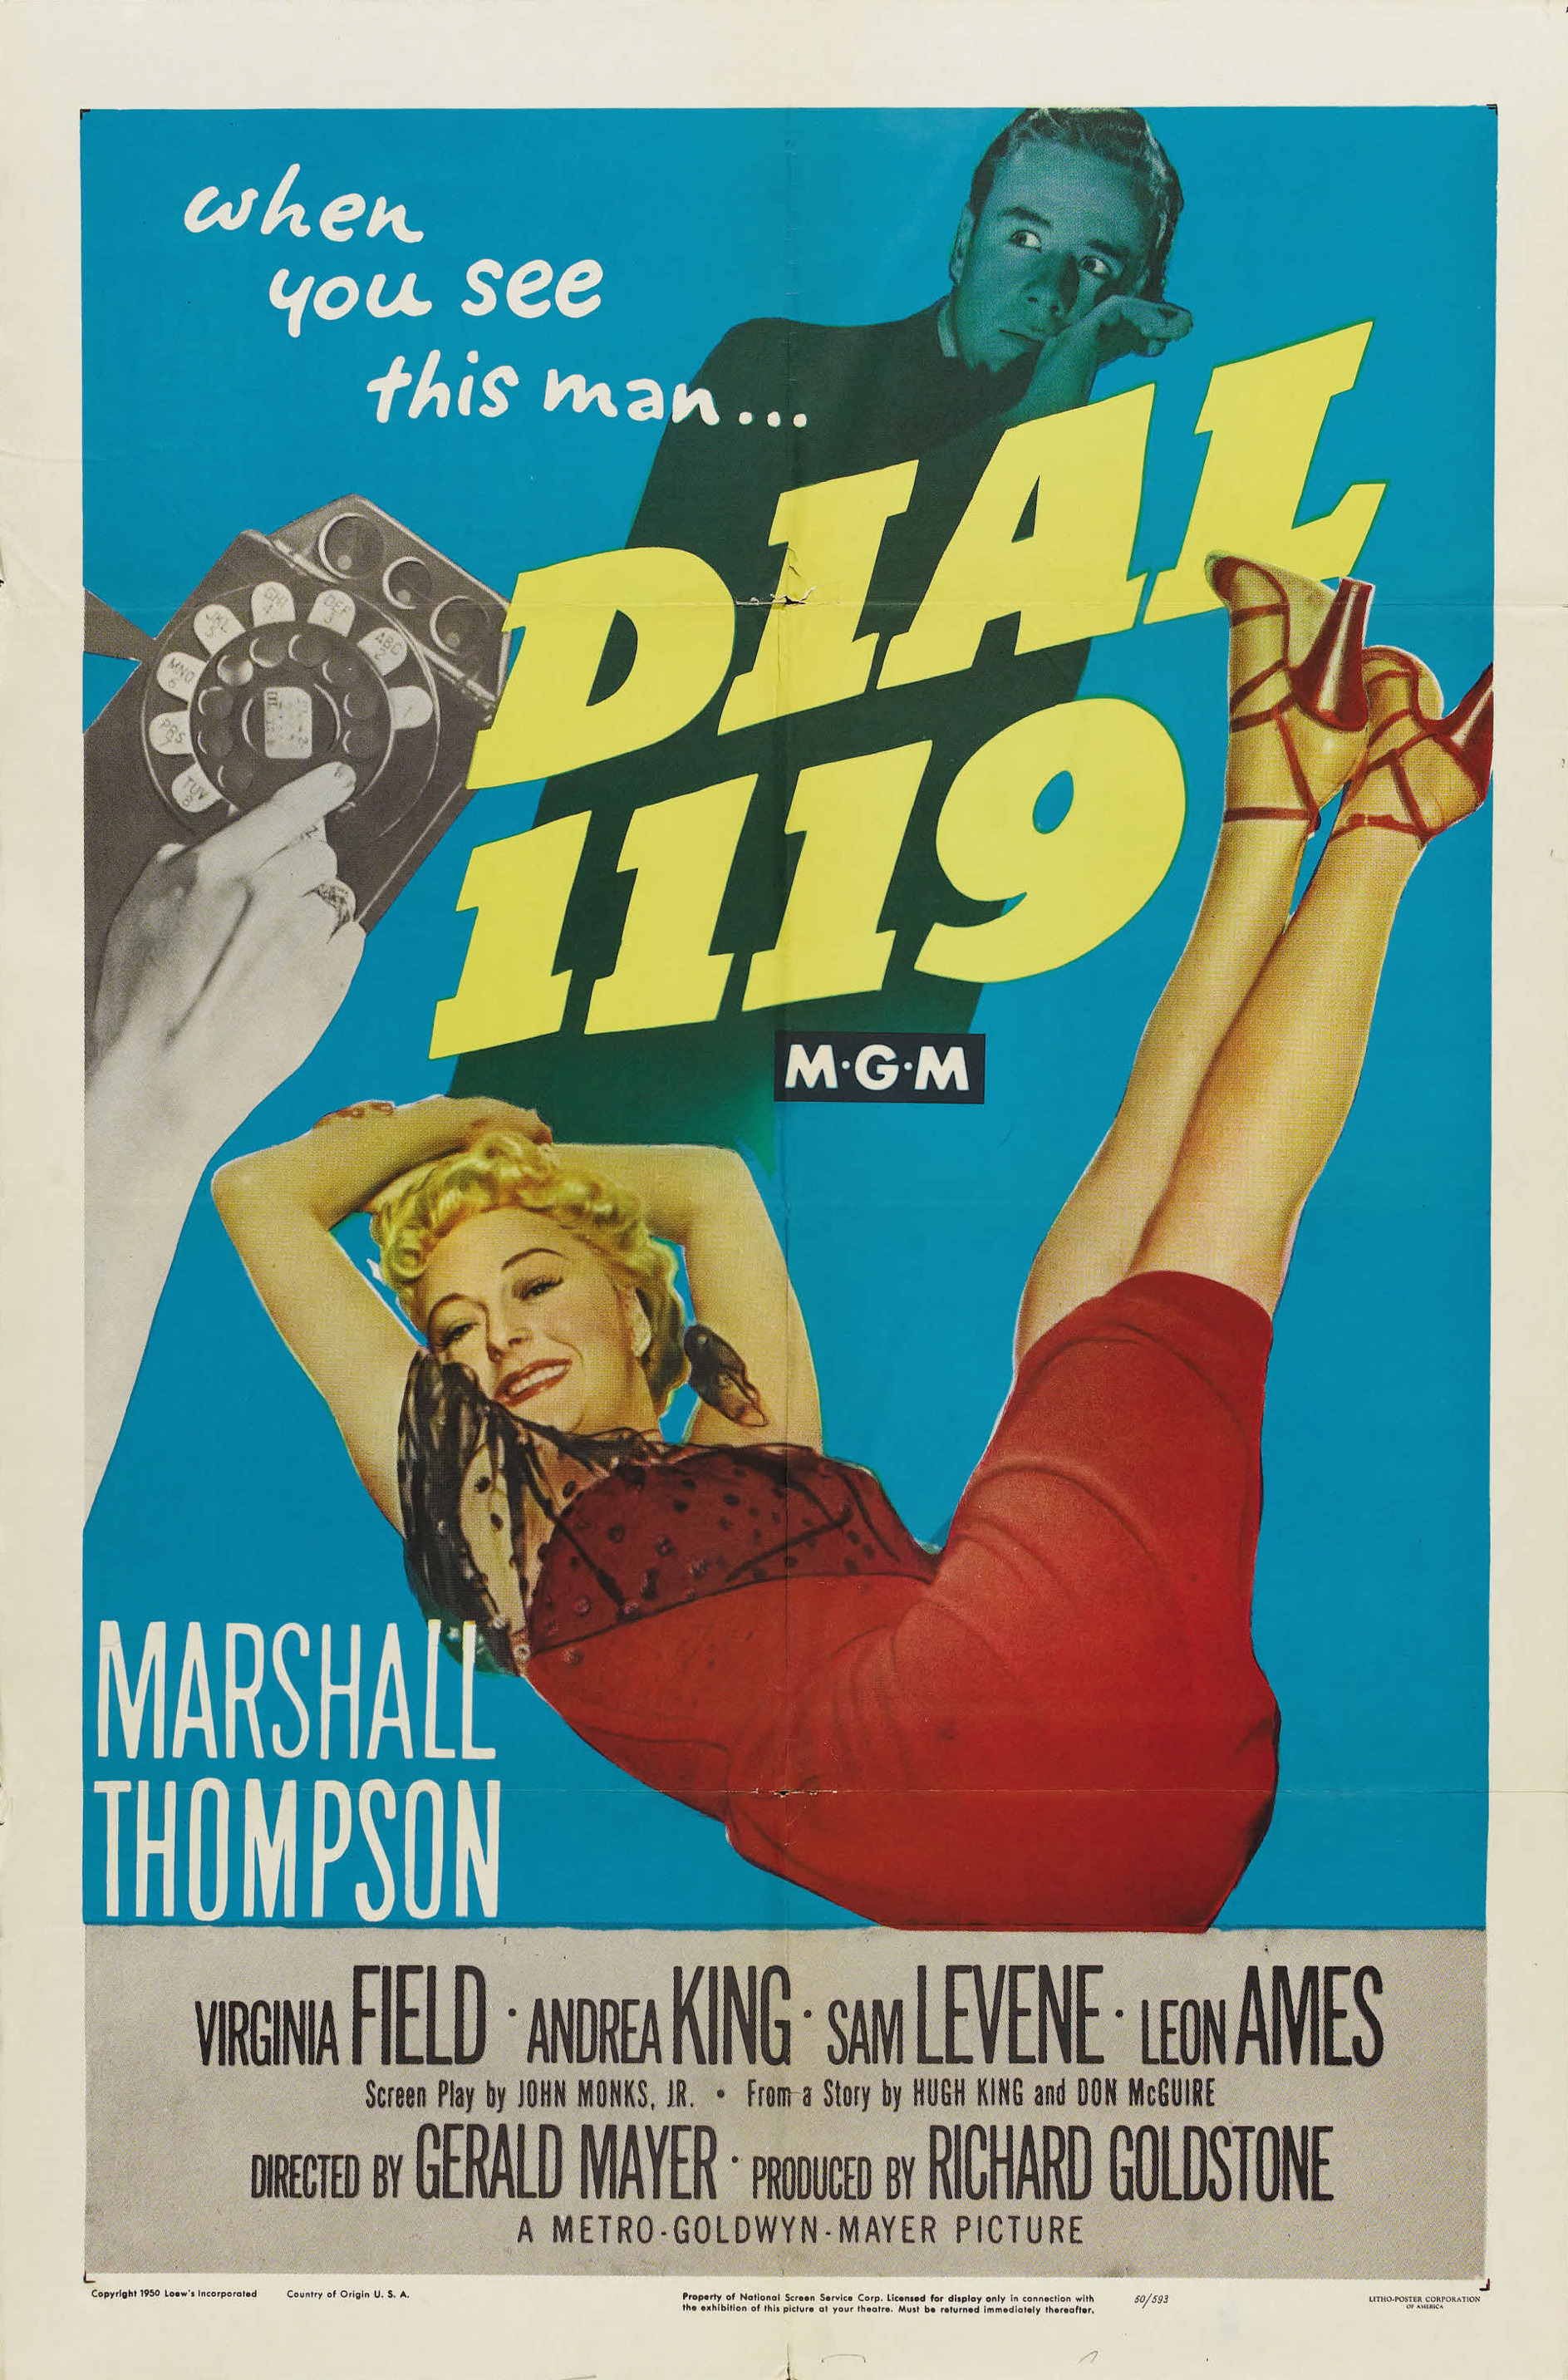 Mega Sized Movie Poster Image for Dial 1119 